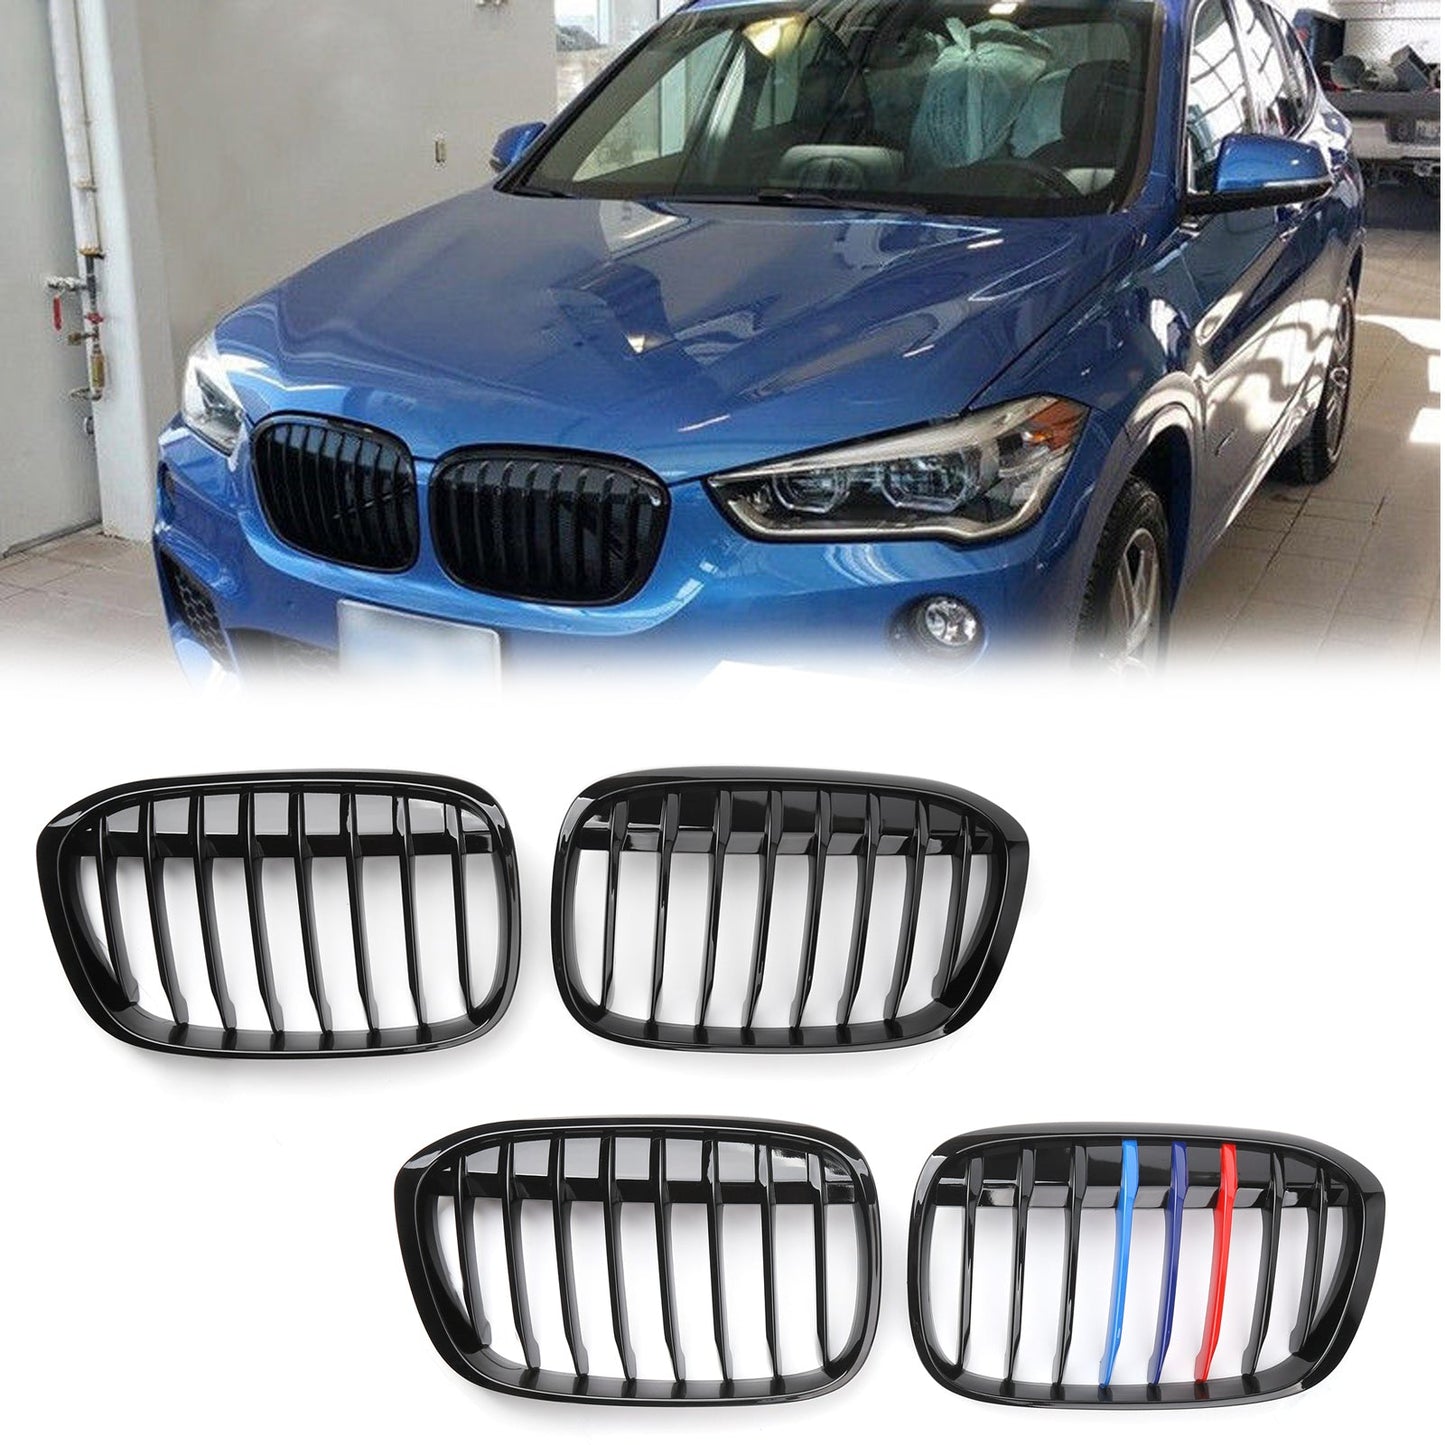 New Pair Front Kidney Grille Grill For BMW 2016+ F48 F49 X1 X-Series Black